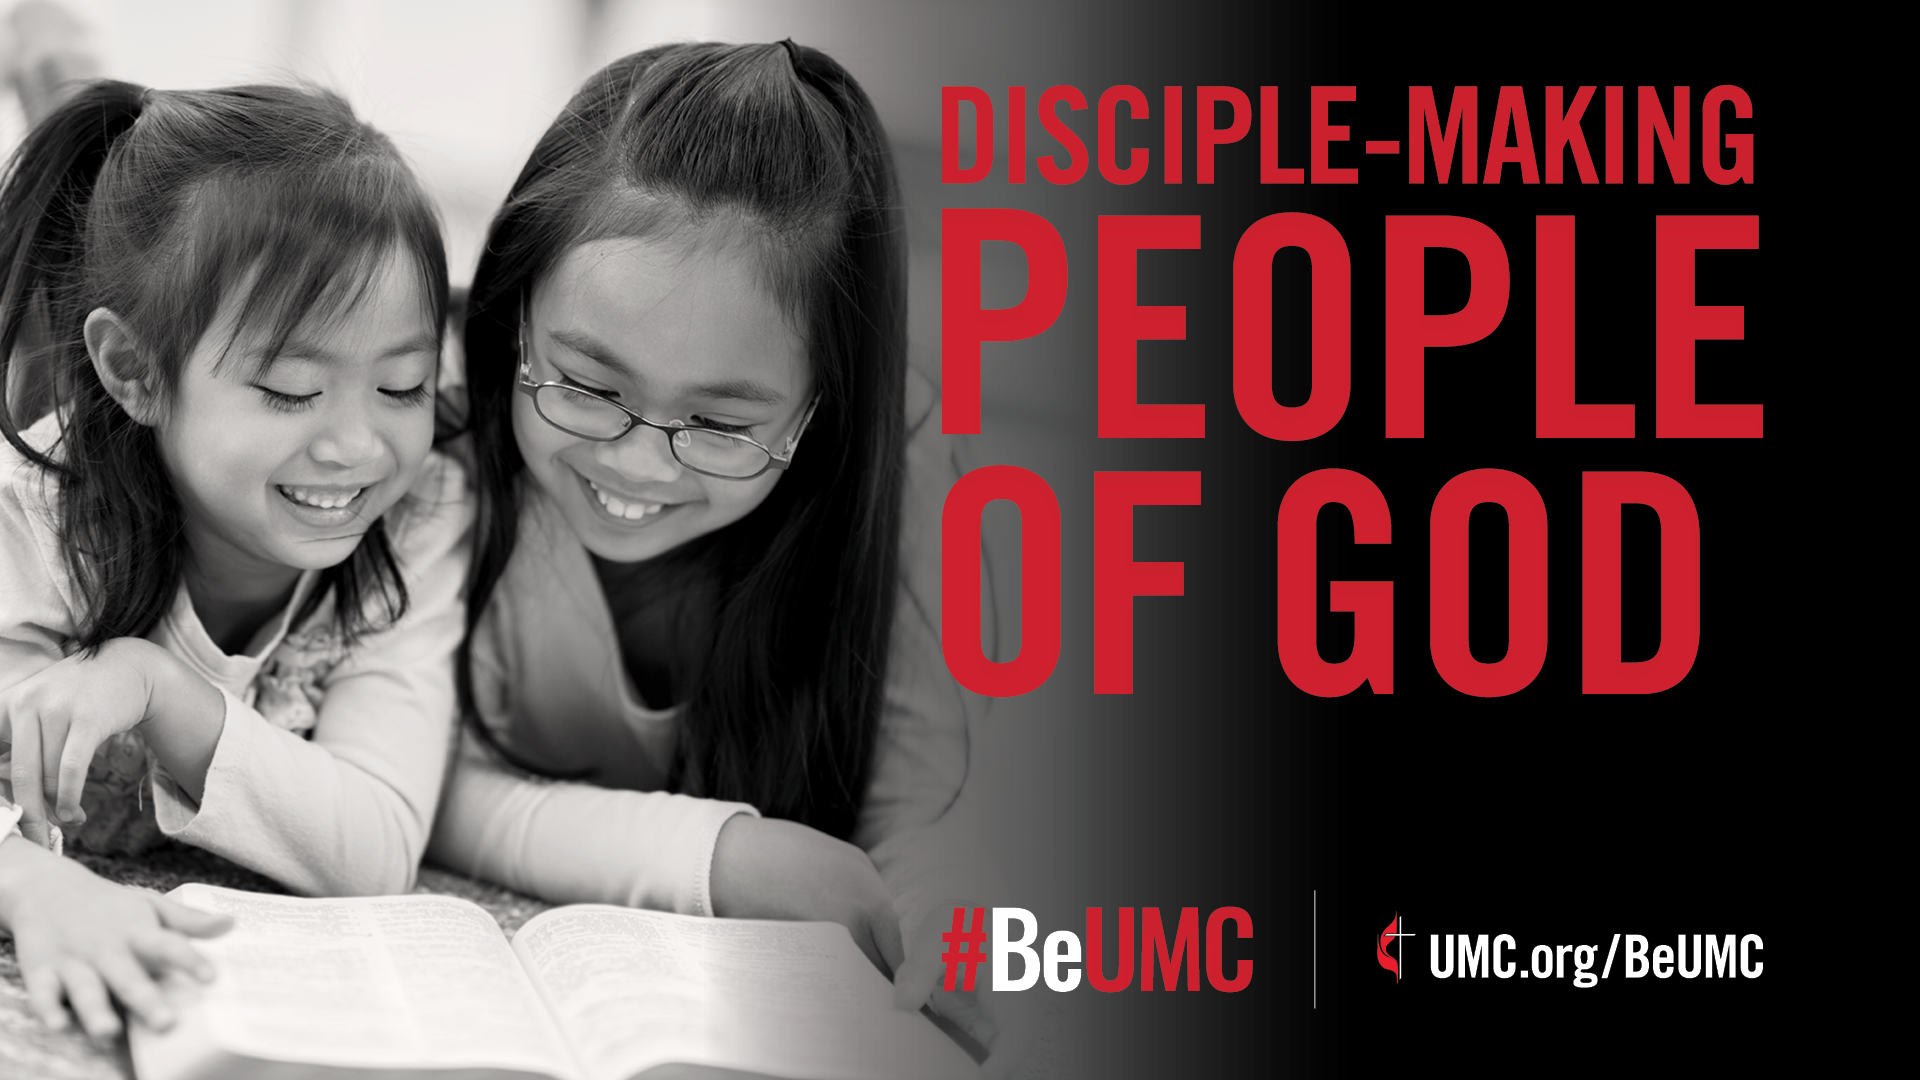 Resources for the Disciple-Making People of God #BeUMC